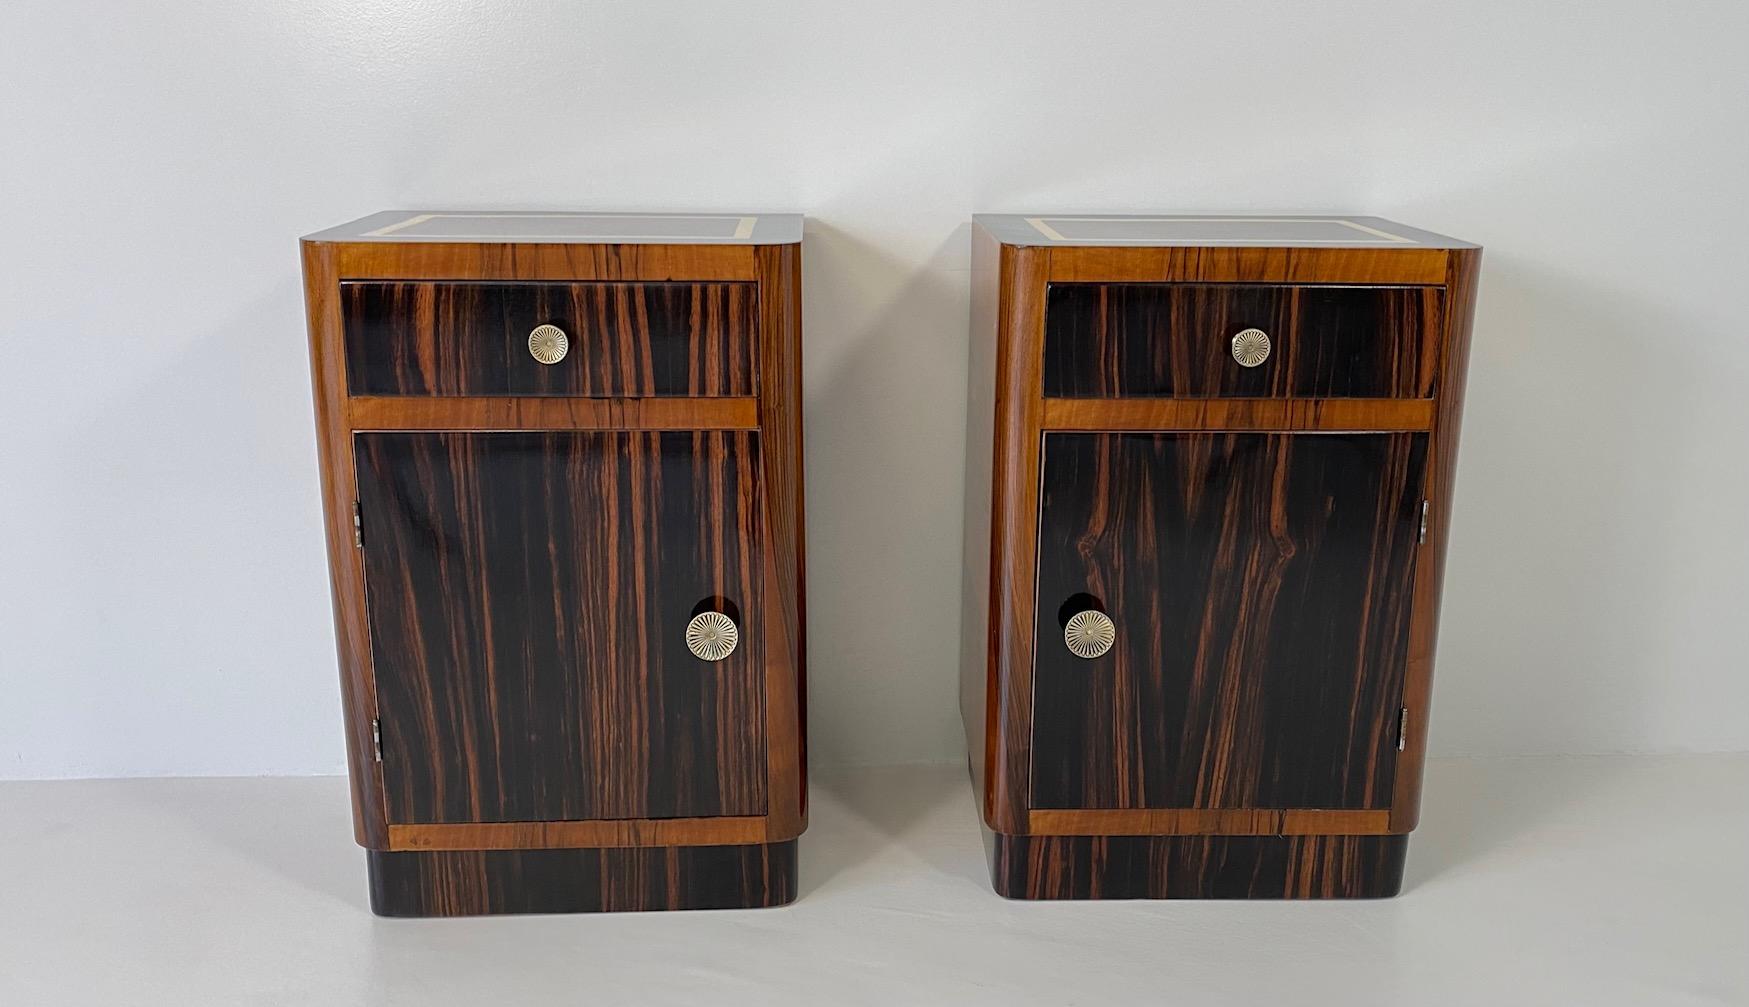 This Elegant pair of Art Deco nightstands was produced in Italy in the 1930s. 

The body is made of Walnut covered solid wood, while the drawer, the door and the base are in Macassar. On the top there is an elegant decoration made of gold leaf. On